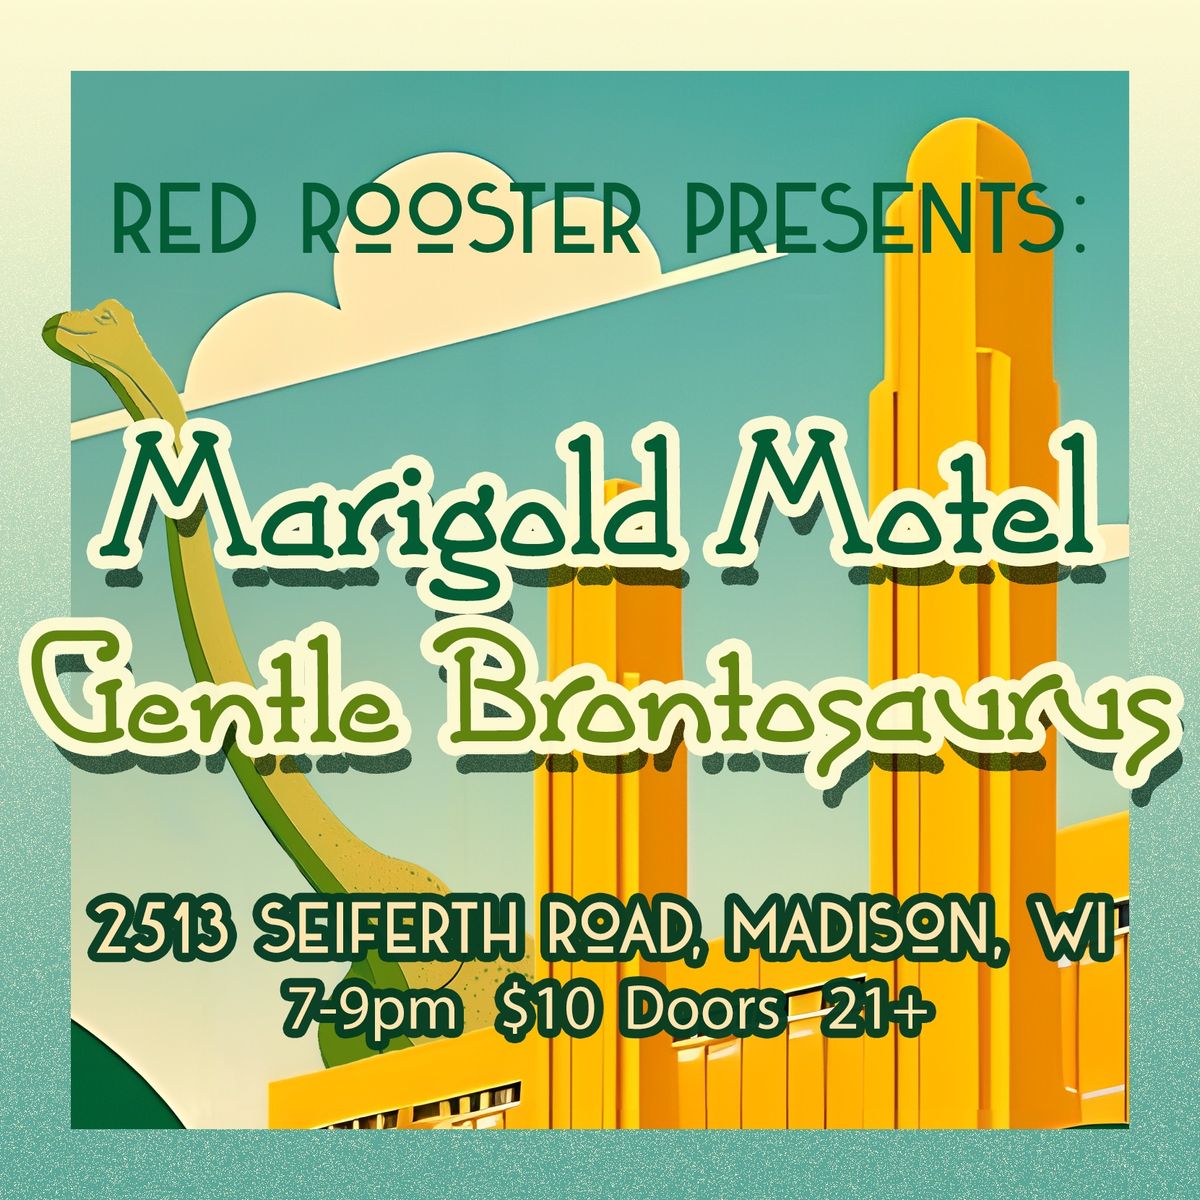 Marigold Motel with Gentle Brontosaurus @ Red Rooster